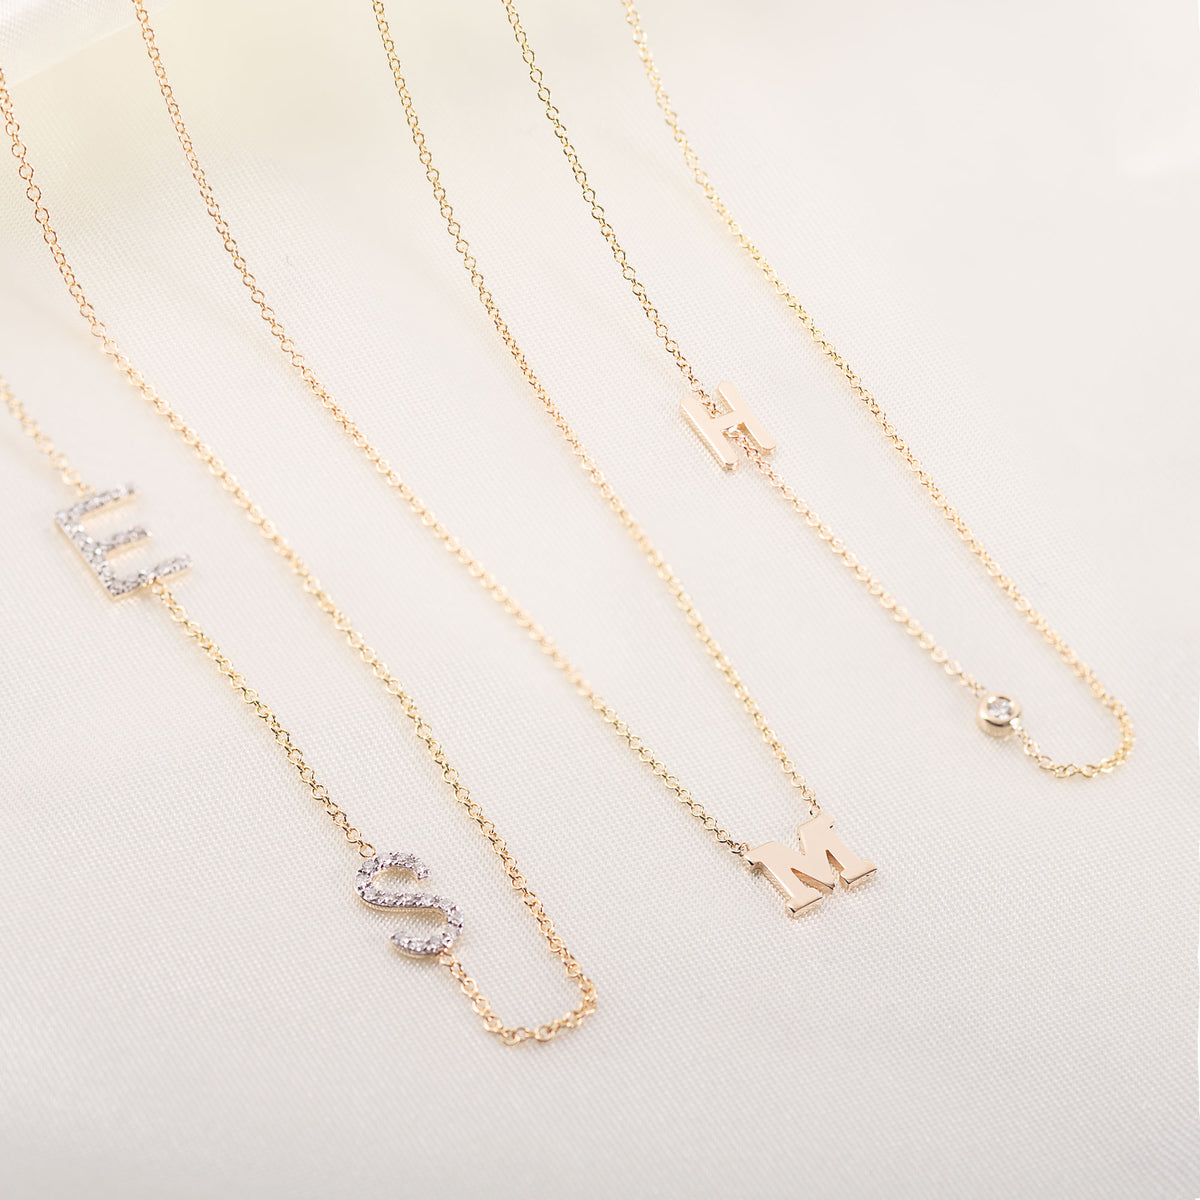 Asymmetrical initial necklaces